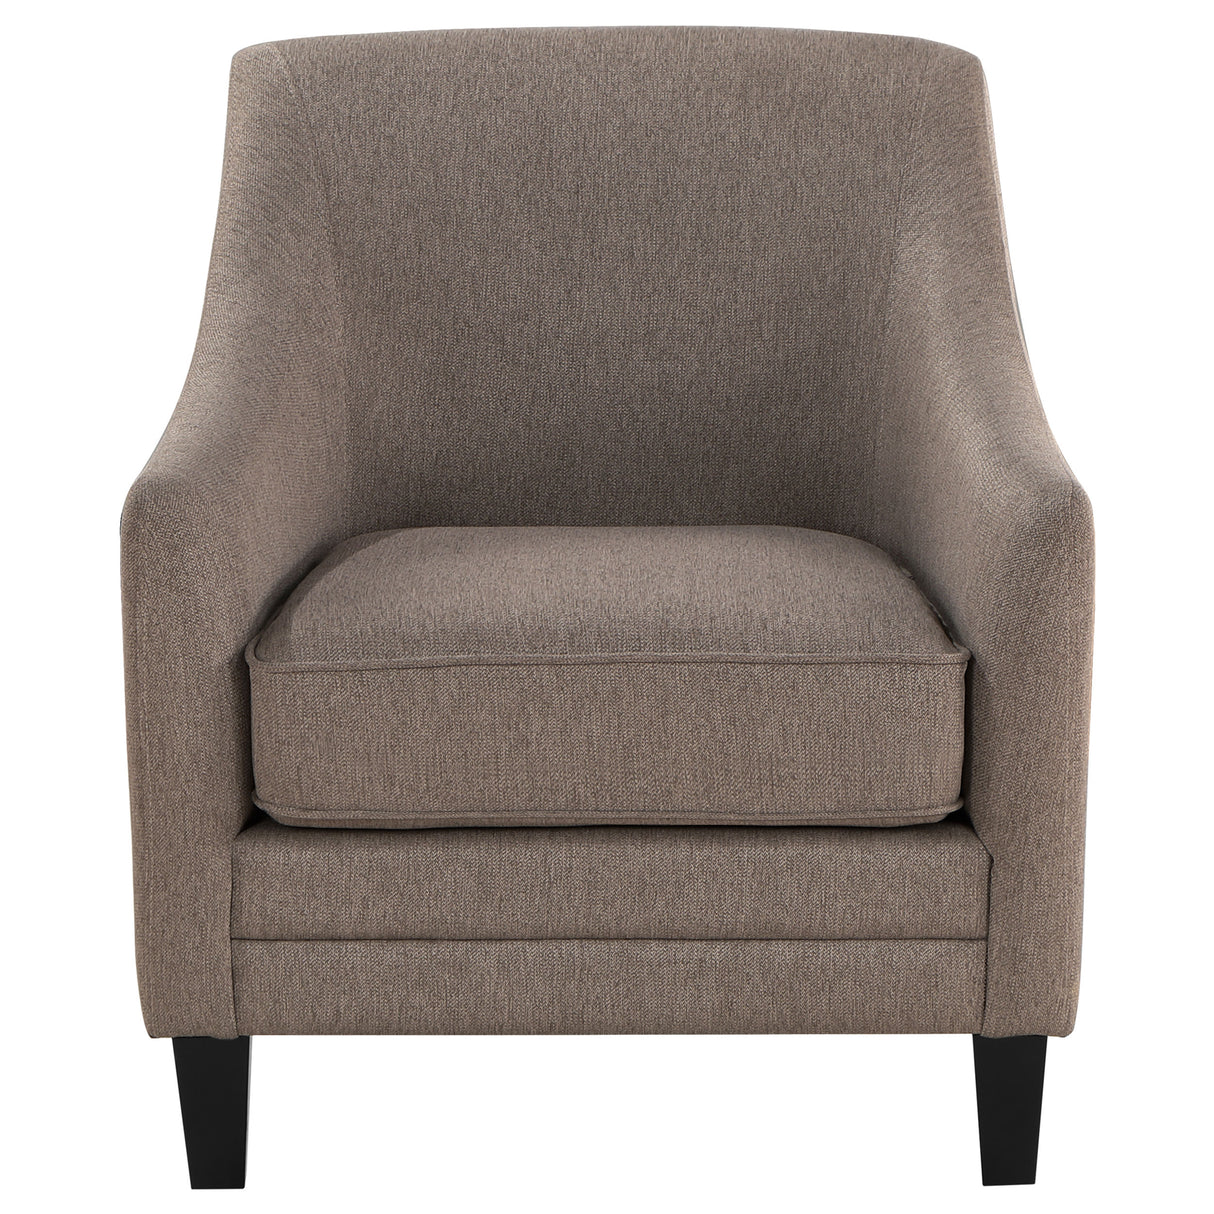 Chair - Liam Upholstered Sloped Arm Accent Club Chair Camel